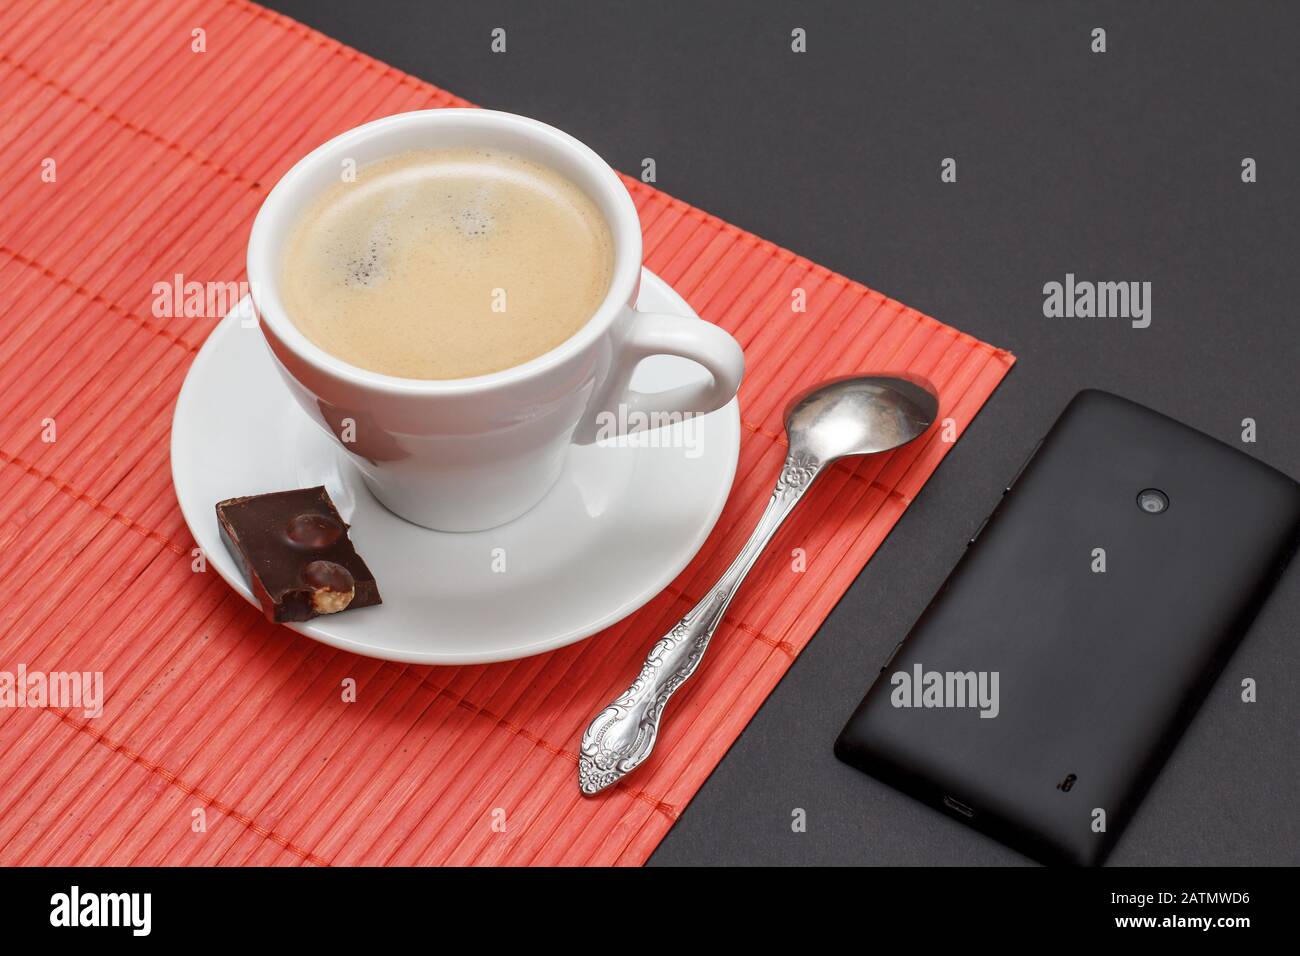 Cup of coffee on saucer with piece of chocolate bar and spoon on bamboo napkin, mobile phone on a black background. Top view. Stock Photo